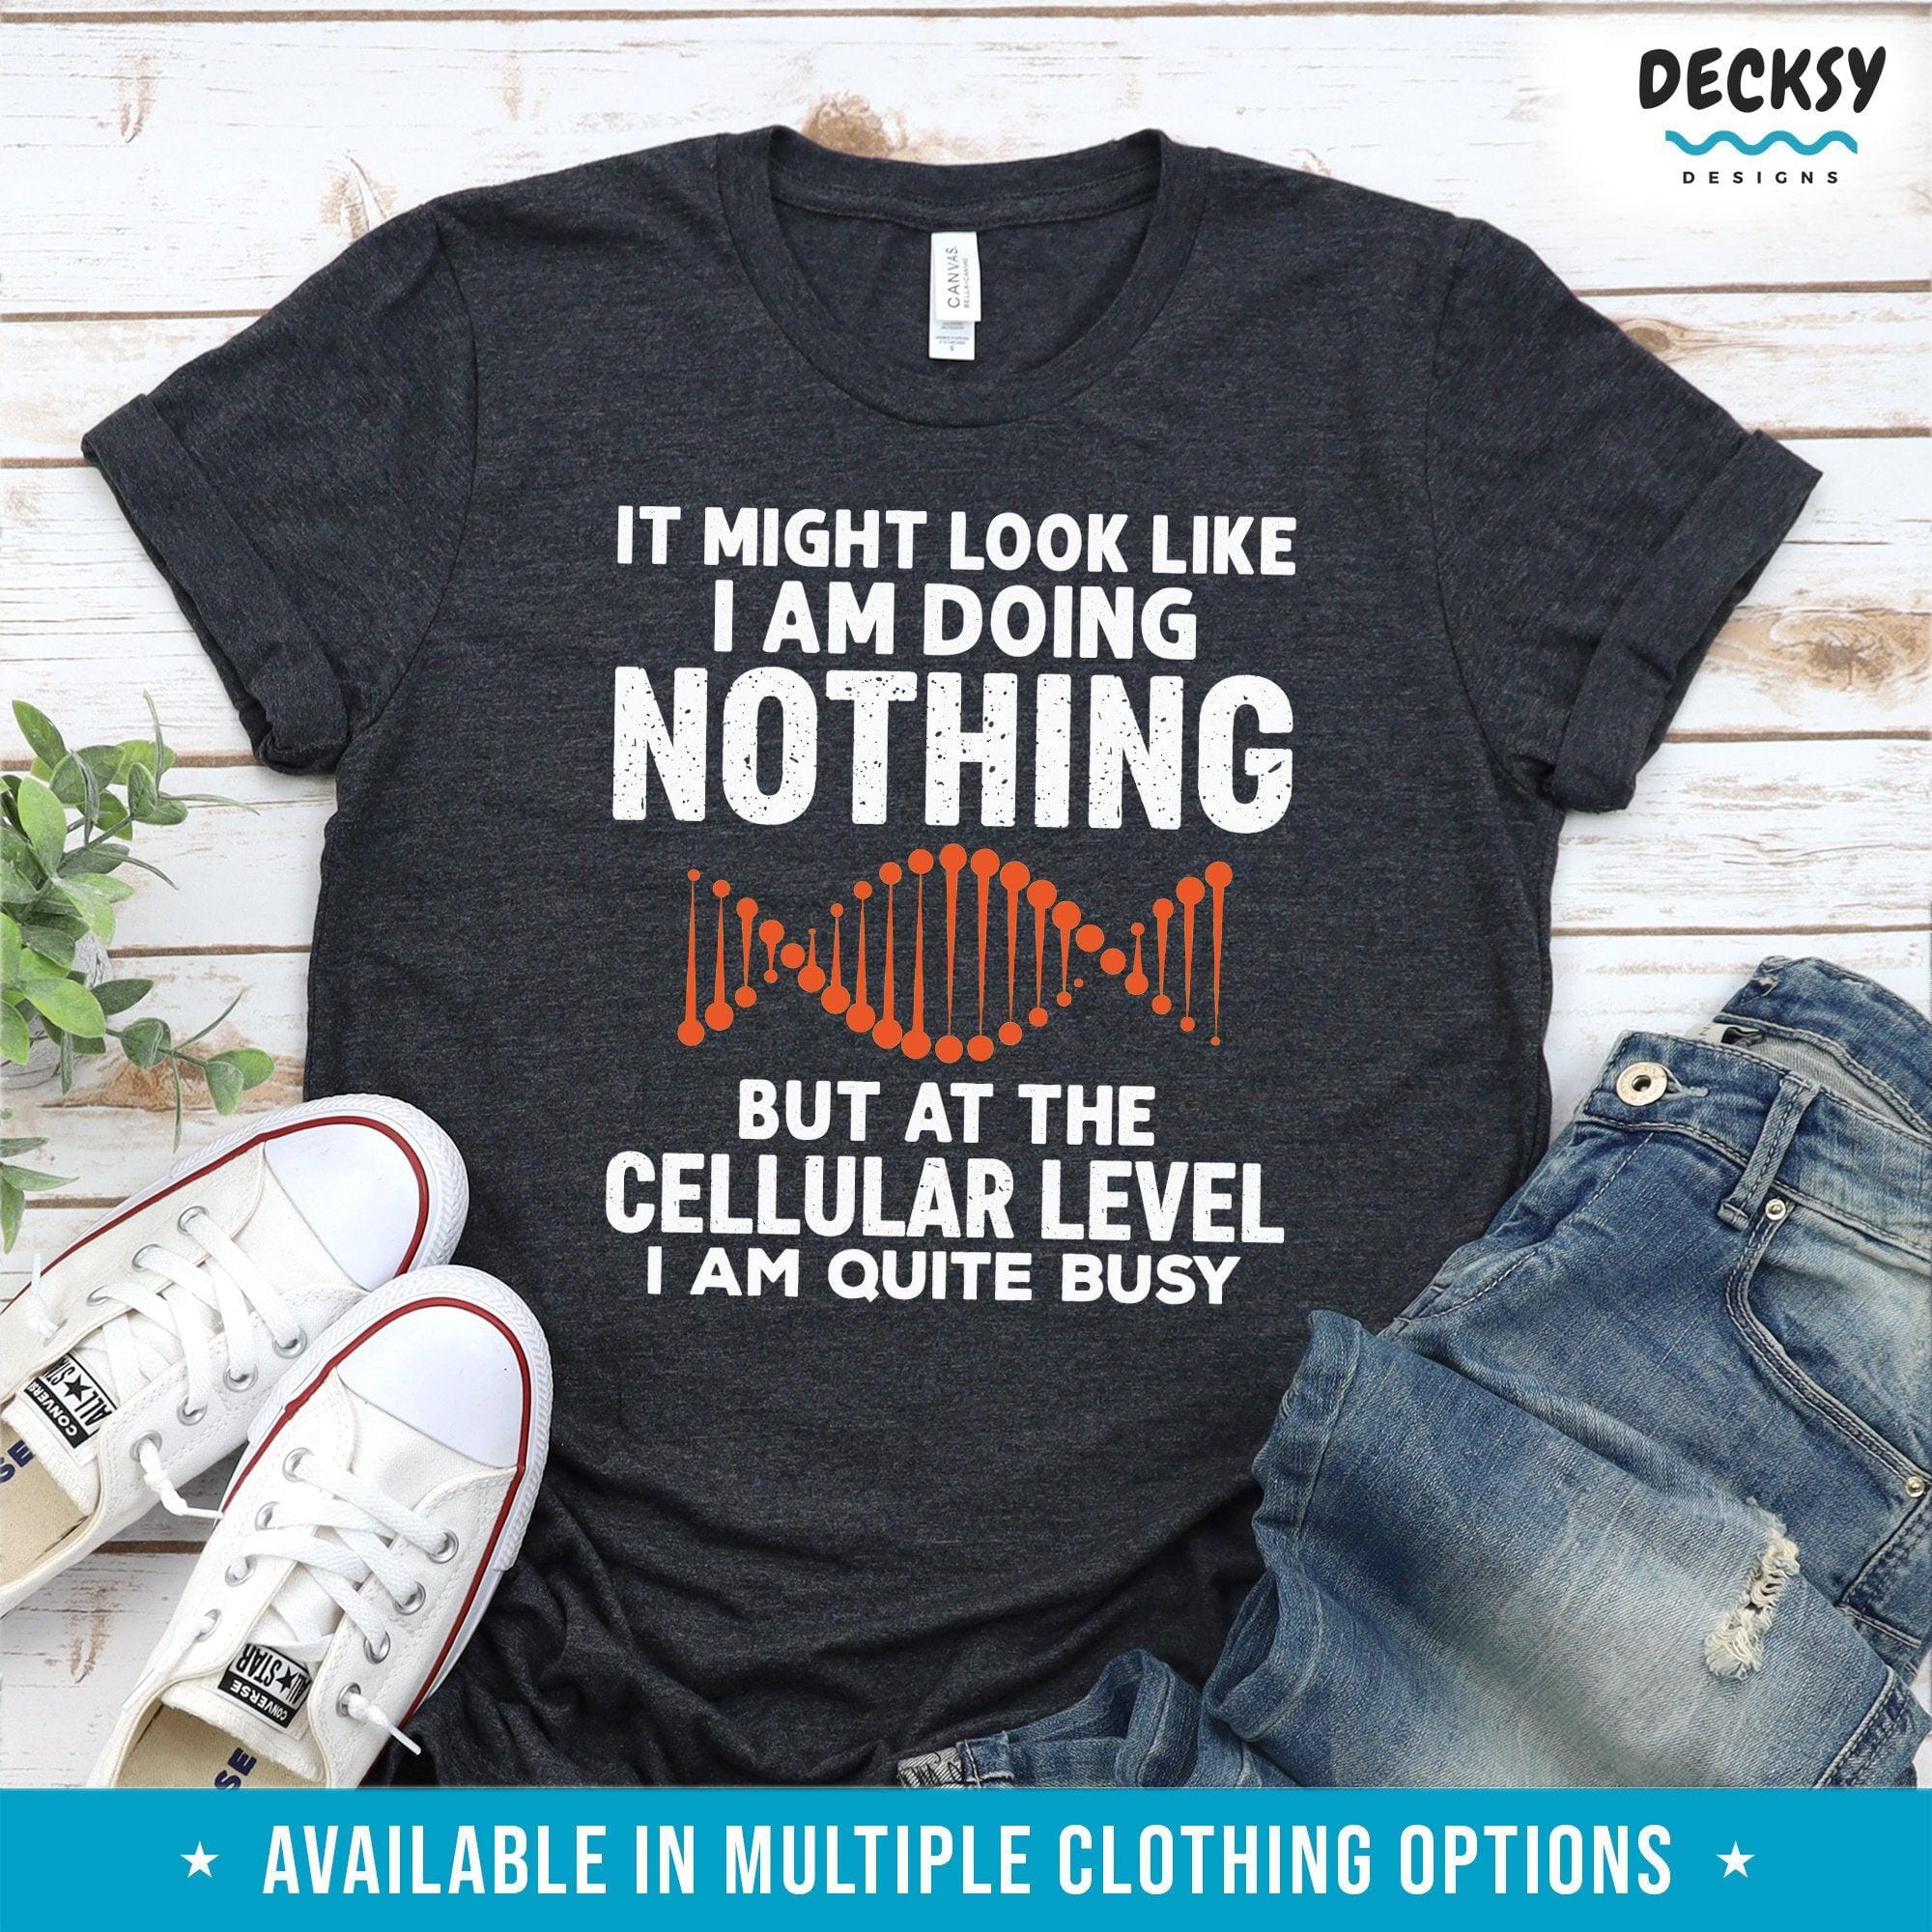 Microbiology Shirt, Funny Science Lover Gift-Clothing:Gender-Neutral Adult Clothing:Tops & Tees:T-shirts:Graphic Tees-DecksyDesigns